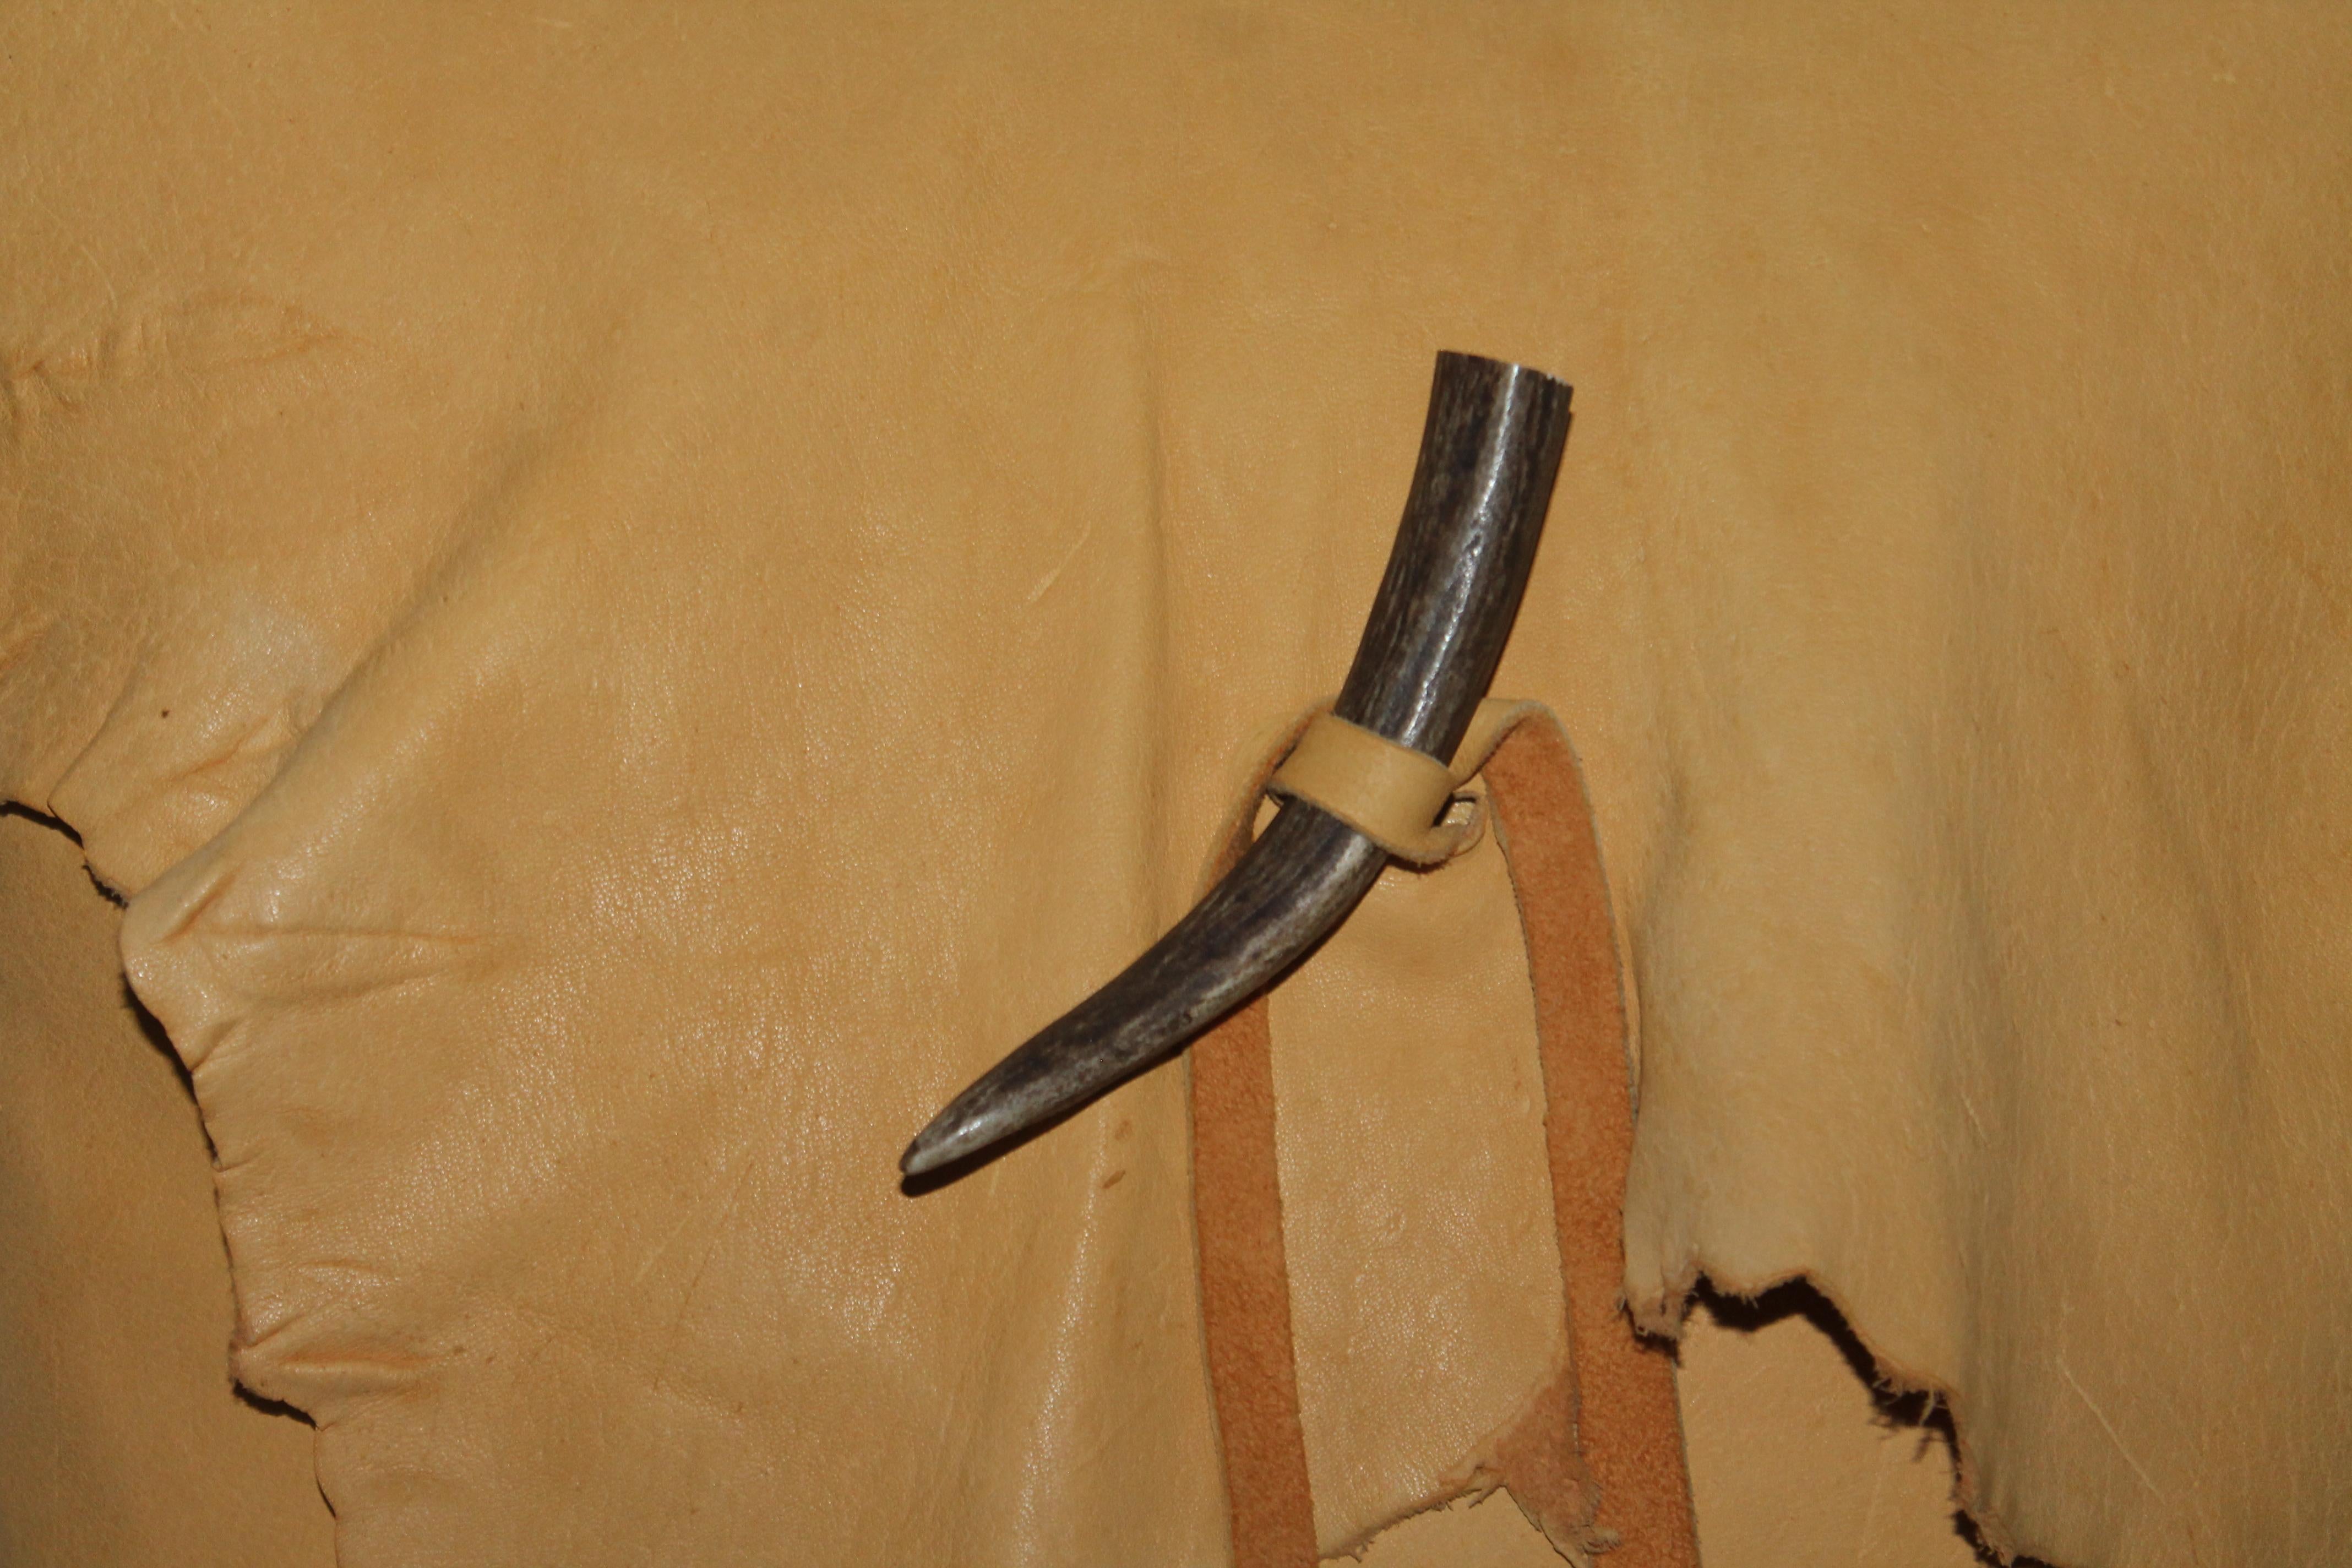 This fine buckskin leather custom made pillow has a old horn for a latch and in very good condition. This fine and soft buckskin is so fine and smooth. The insert is a down and feather filled insert.